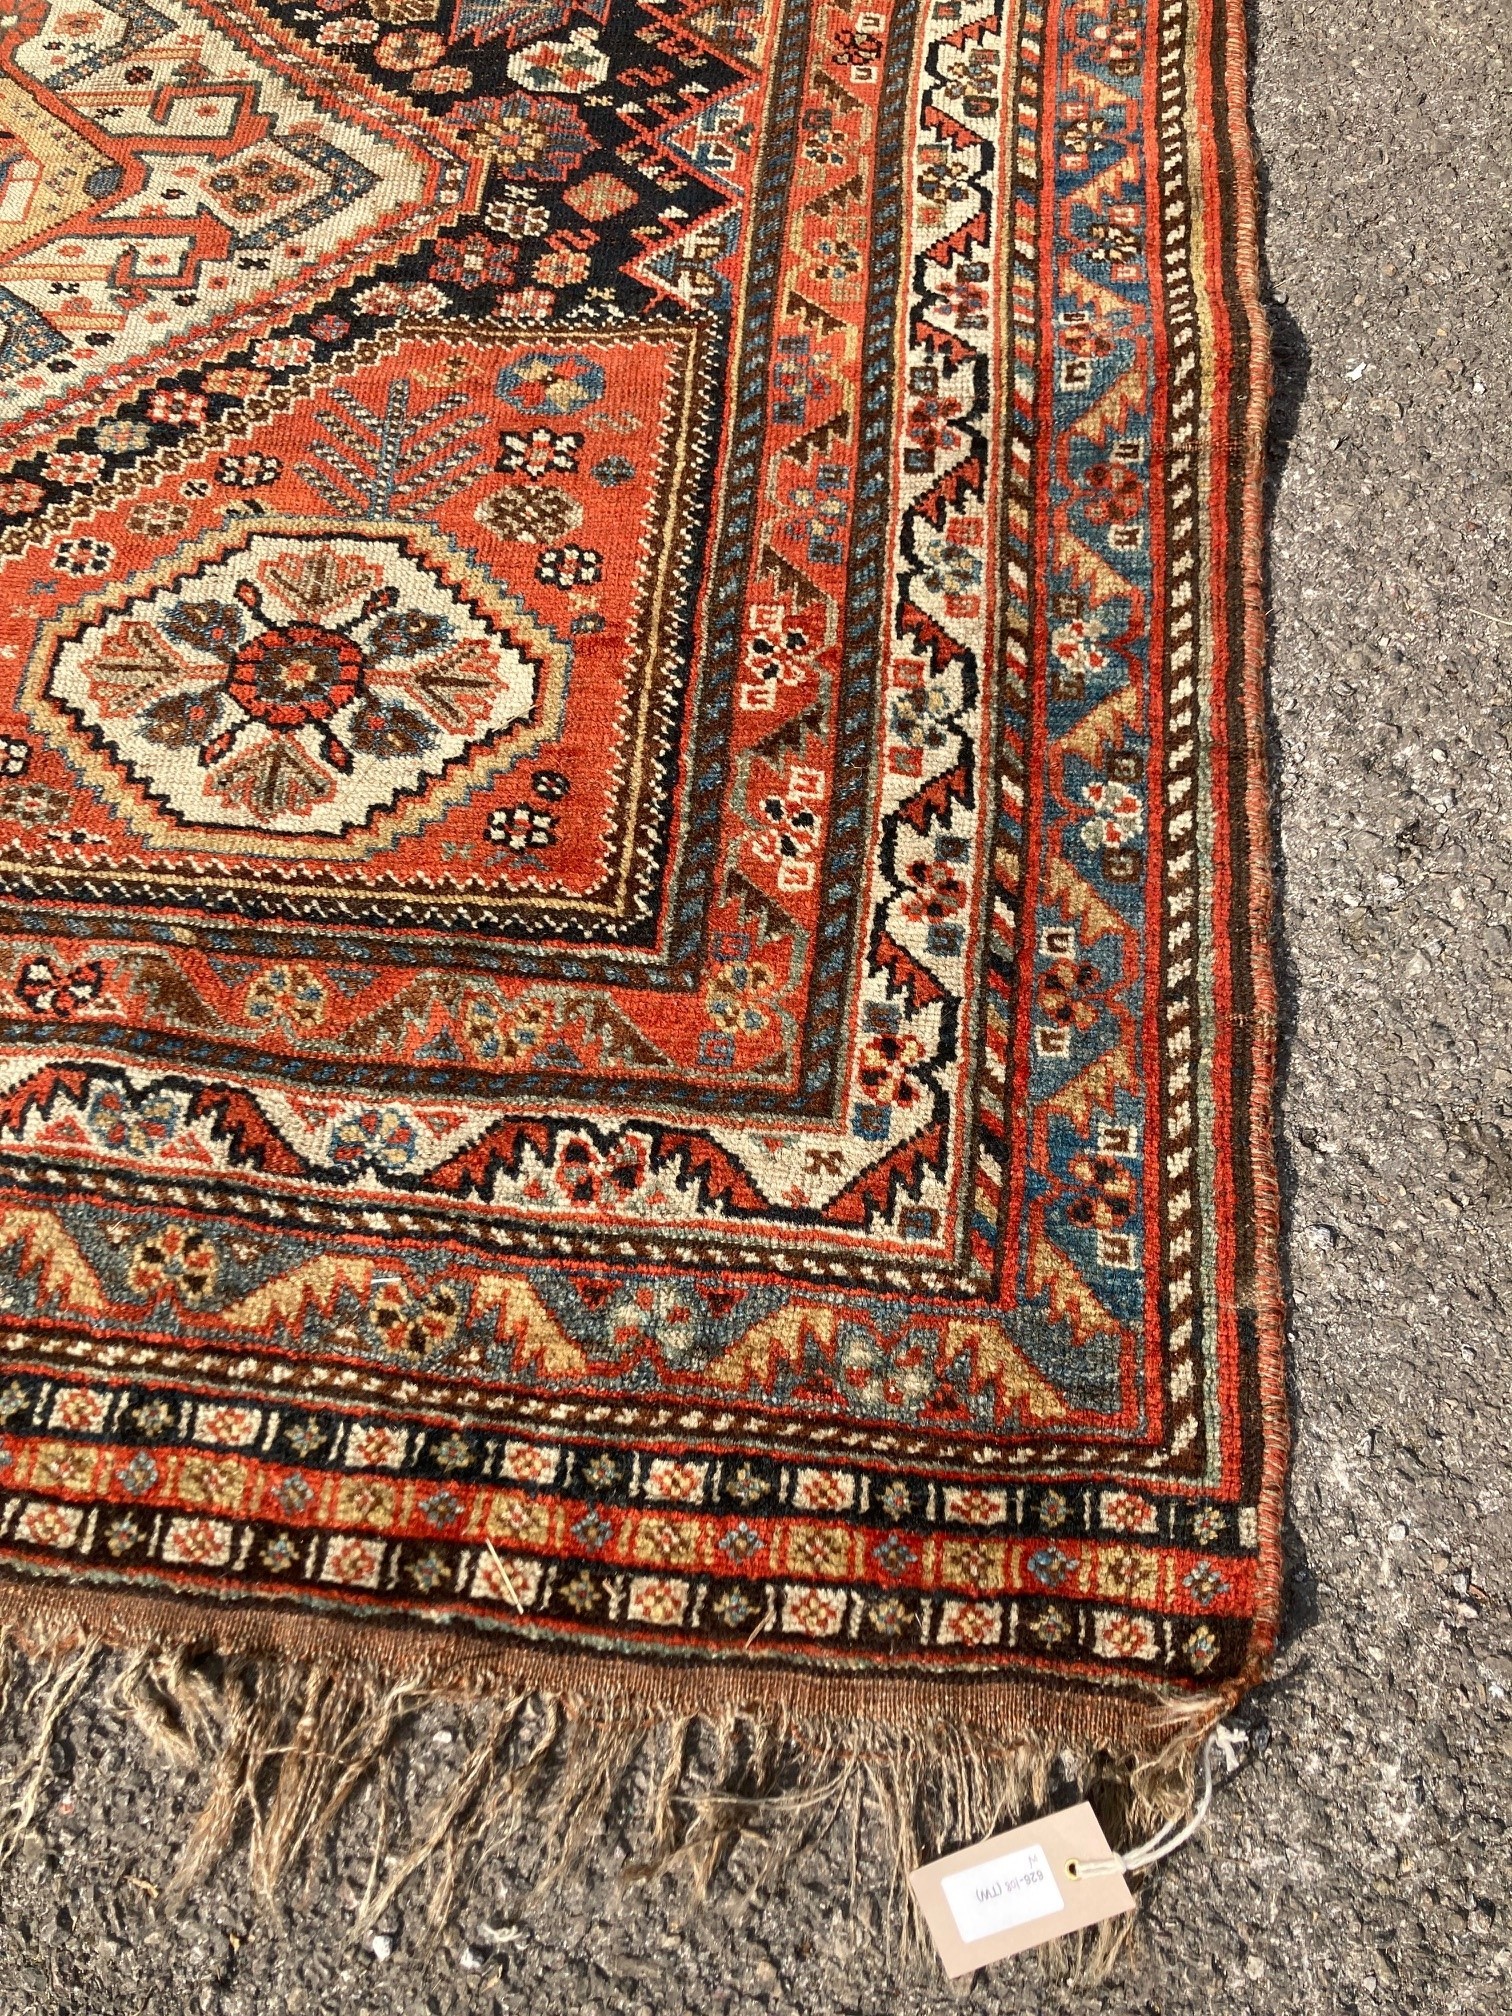 An early 20th century Persian blue ground rug, having three central medallions and floral decoration, 250 x 146cm